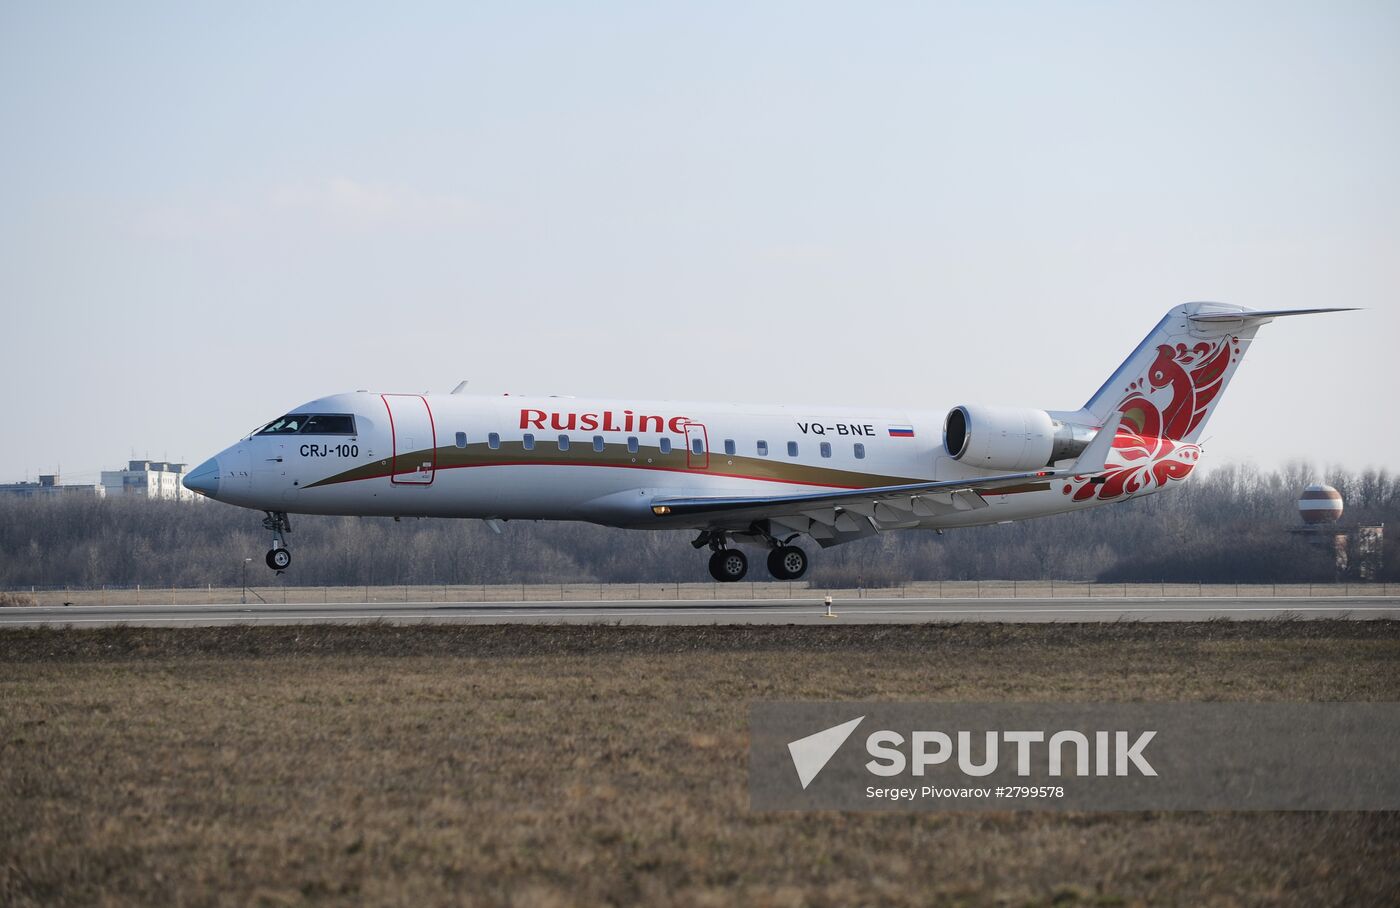 RusLine goes on its maiden voyage from Kazan to Rostov-on-Don